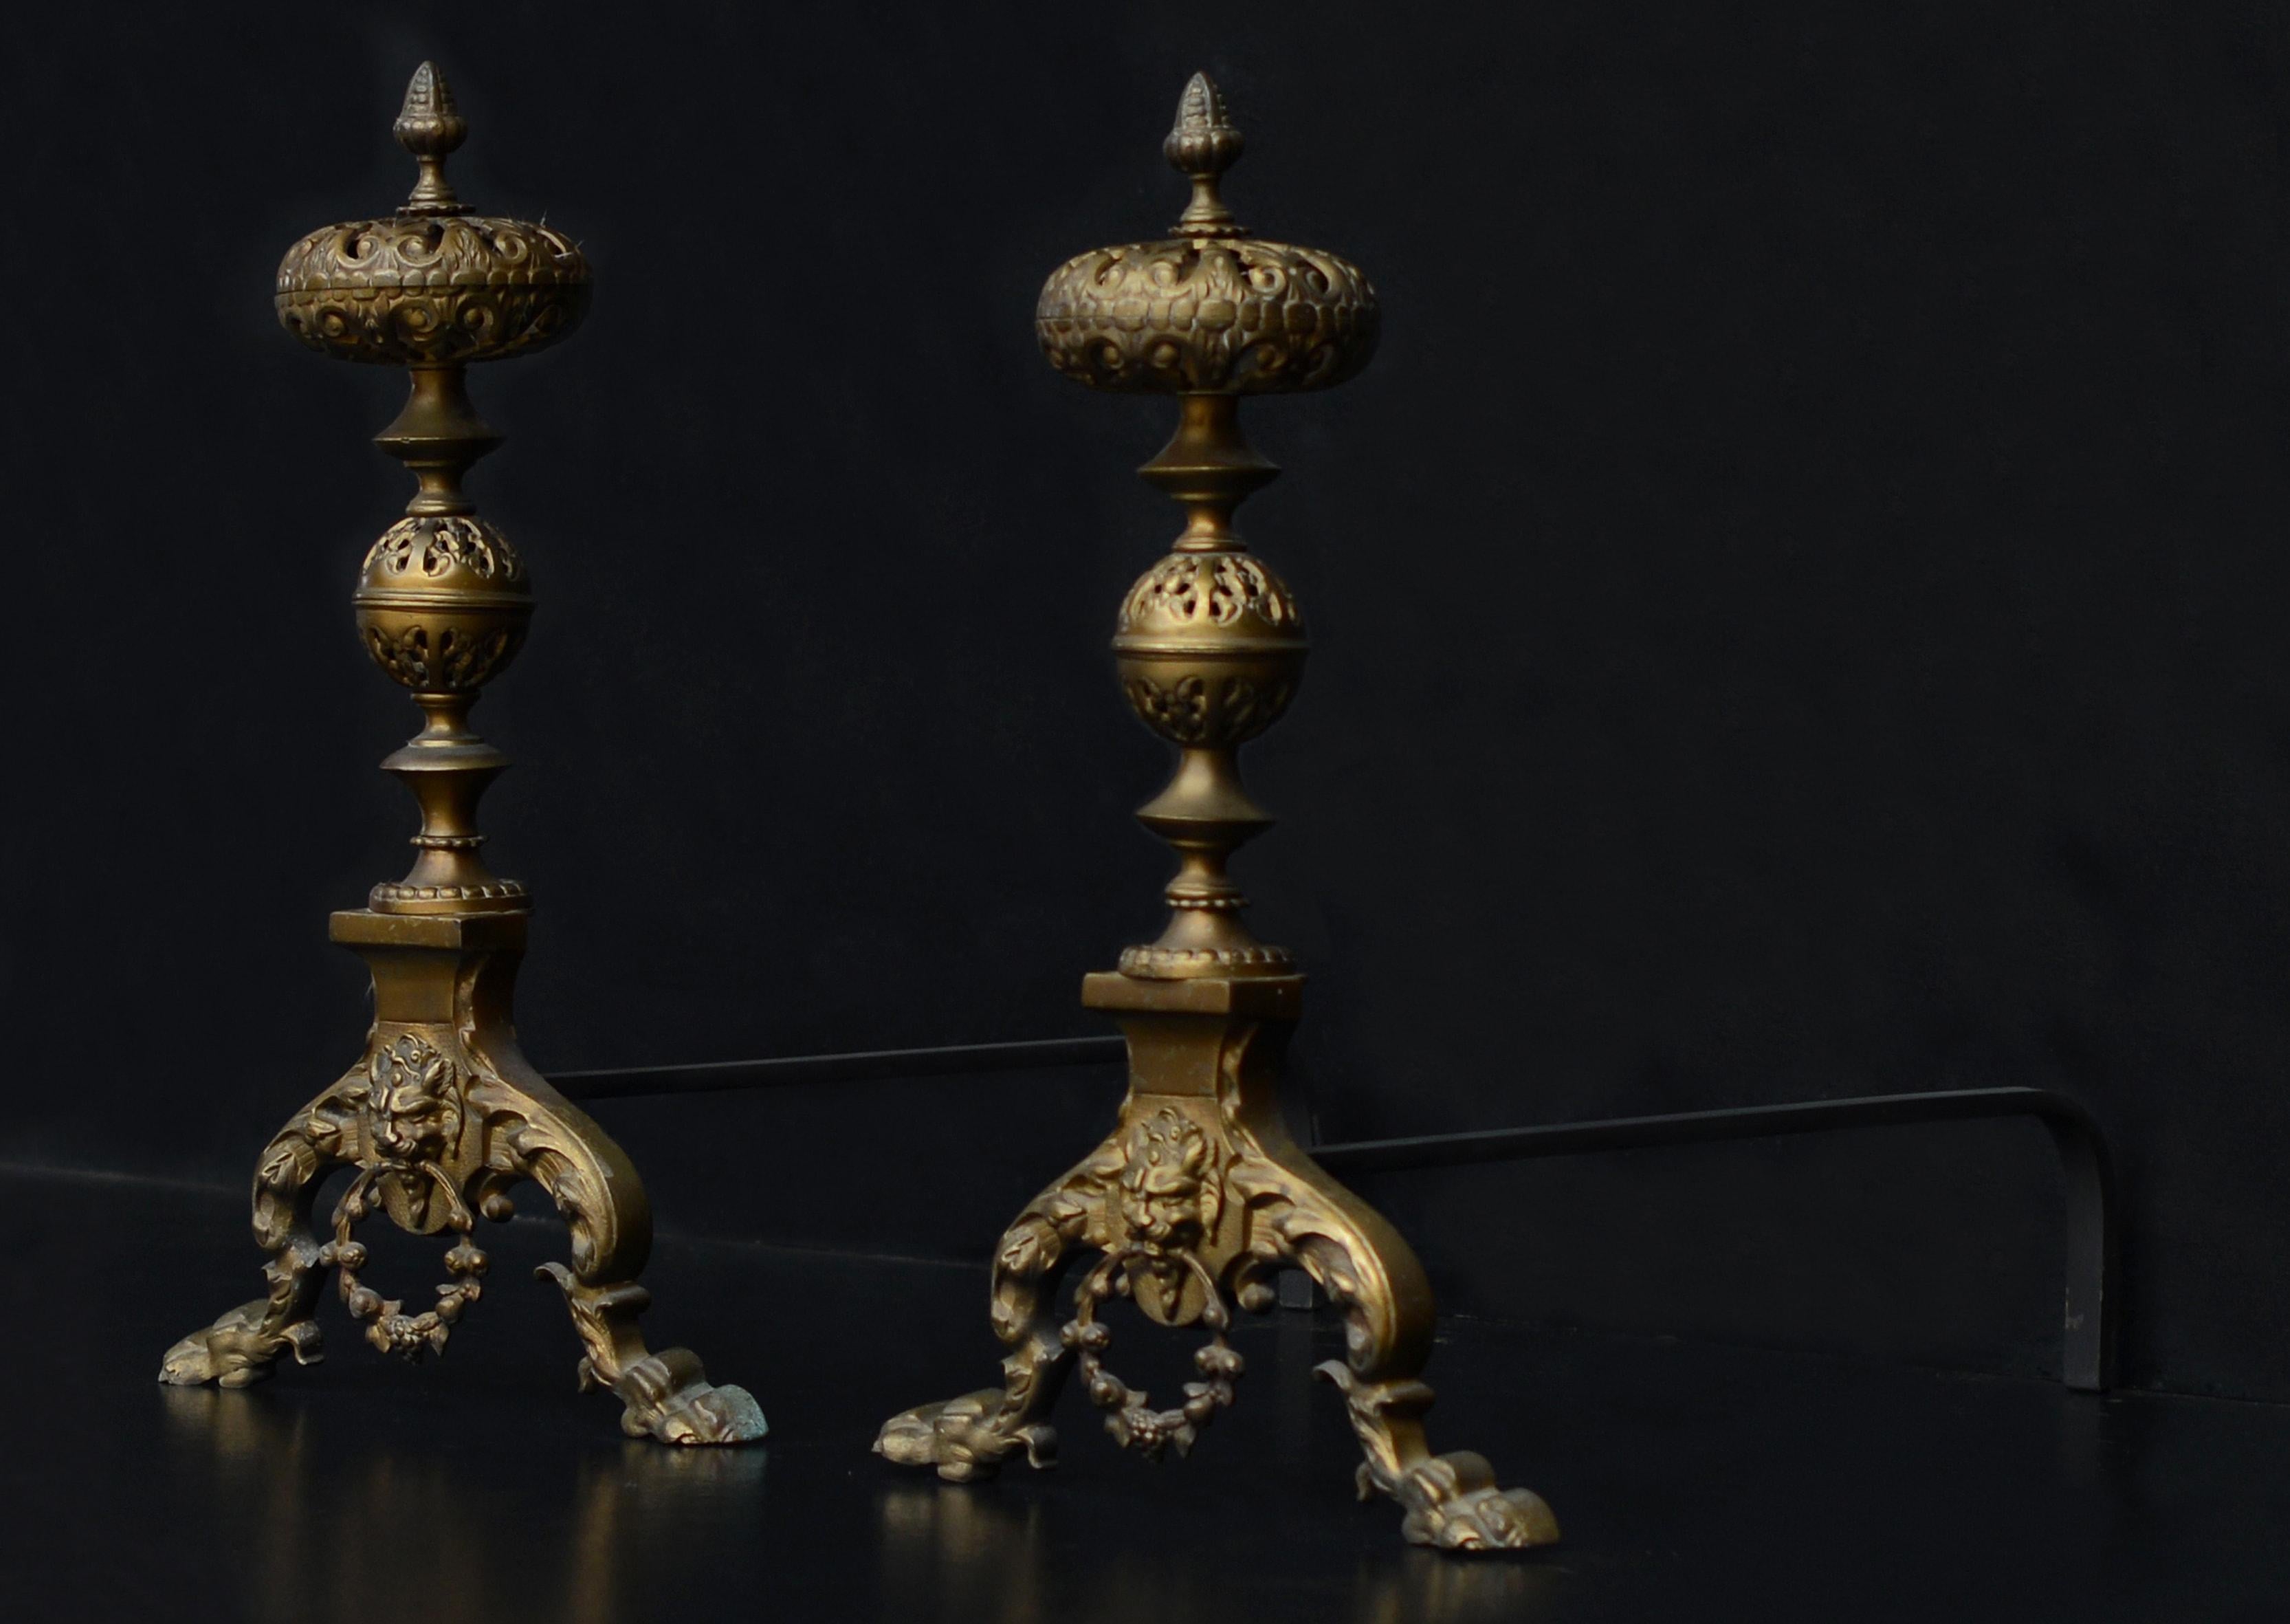 A pair of ornate brass firedogs. The paw feet with mask and ring handle to centre, surmounted by pierced brass balls to shafts. Currently not polished to high shine, but could be polished if required.

Measures: Height: 535 mm 21 